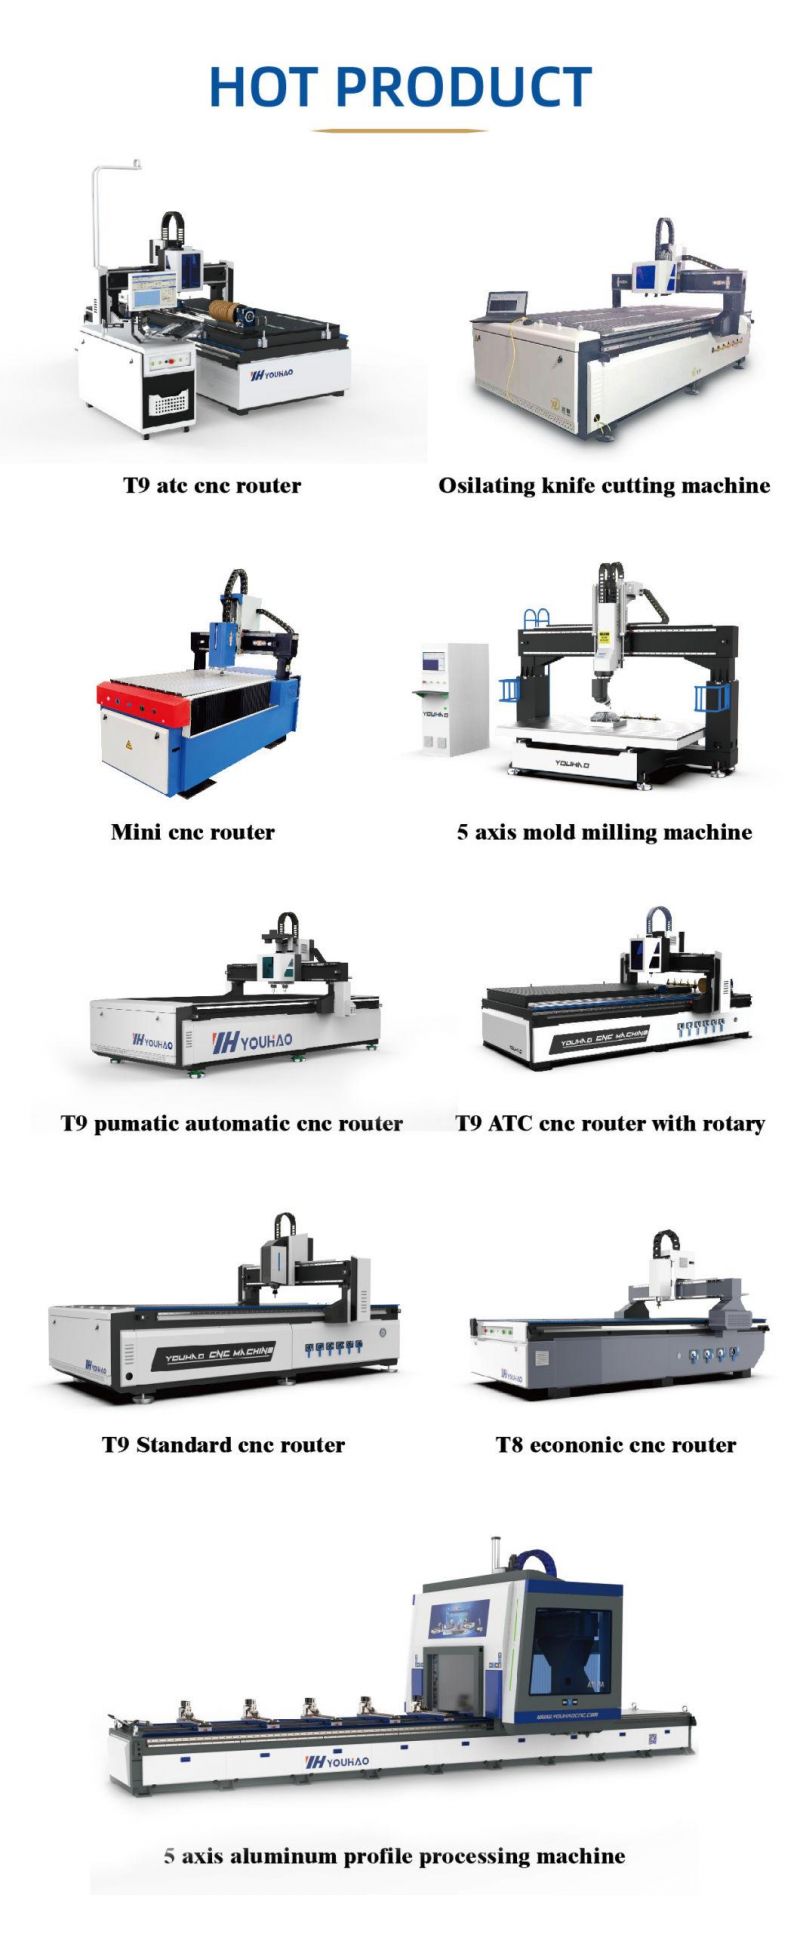 Auto Tool Change CNC Carving Engraving Machine 1325 2030 with 9kw Atc Spindle Woodworking CNC Cutting Router